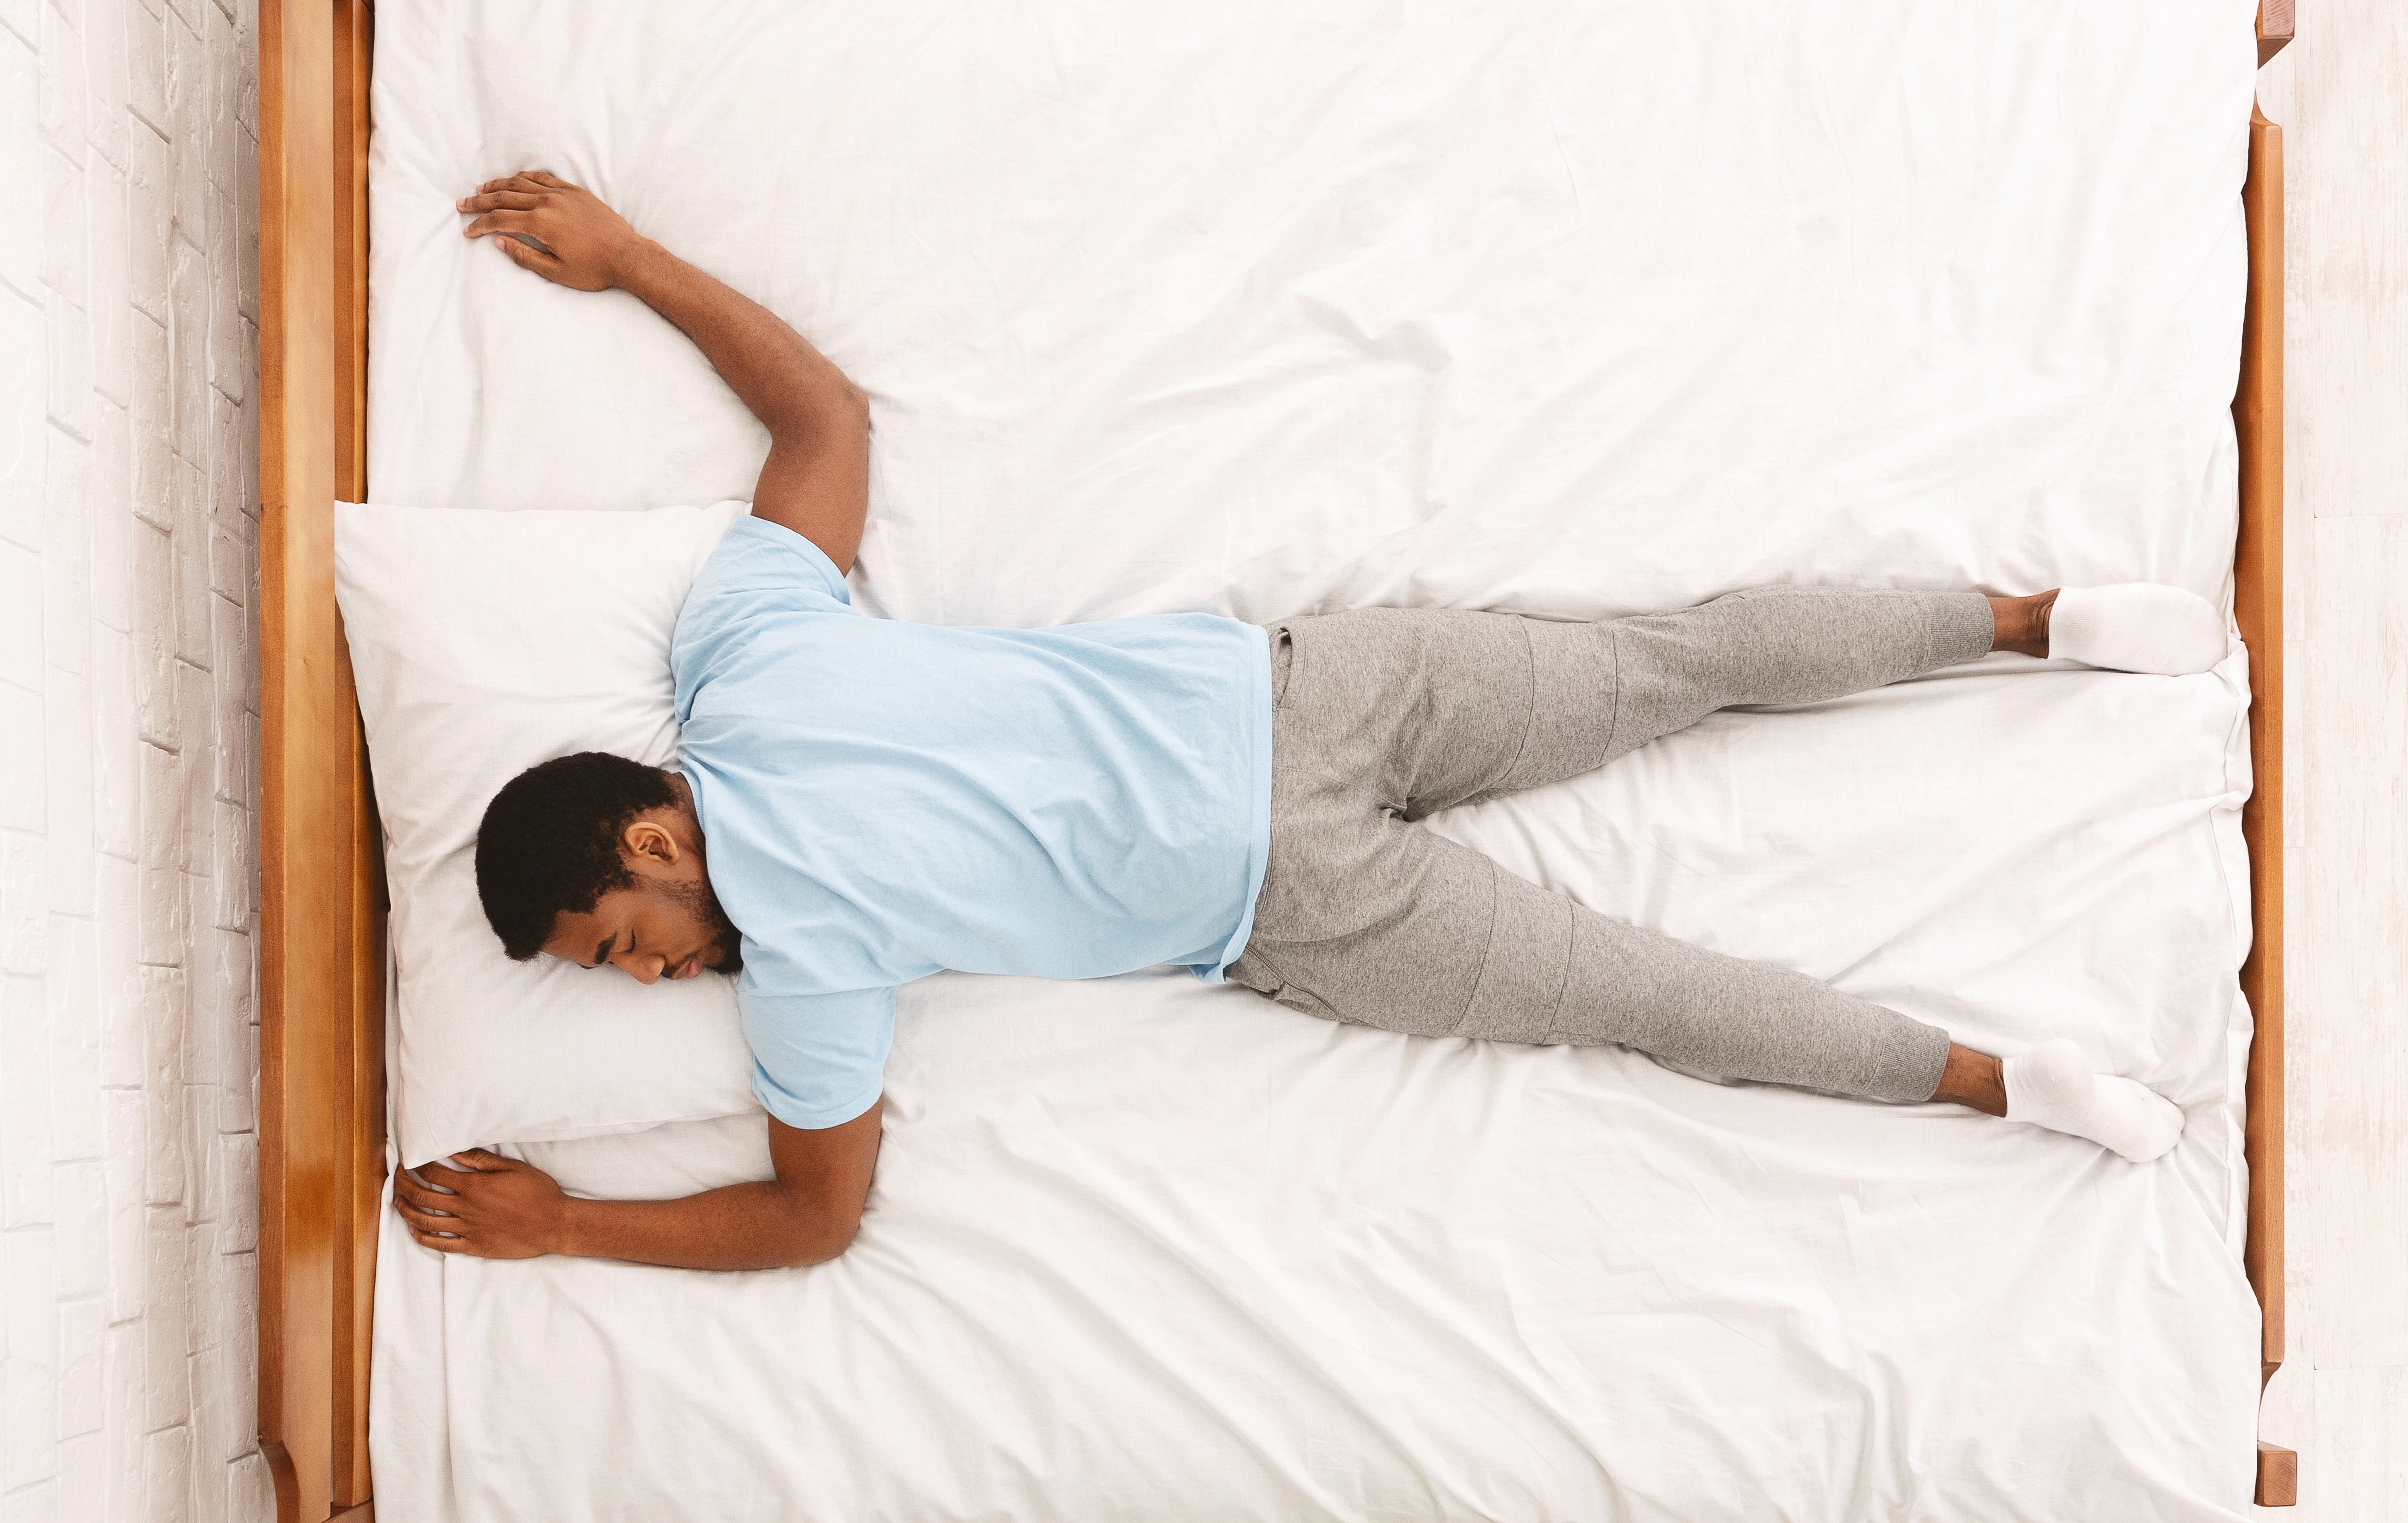 Is Being a Stomach Sleeper a Bad Thing?